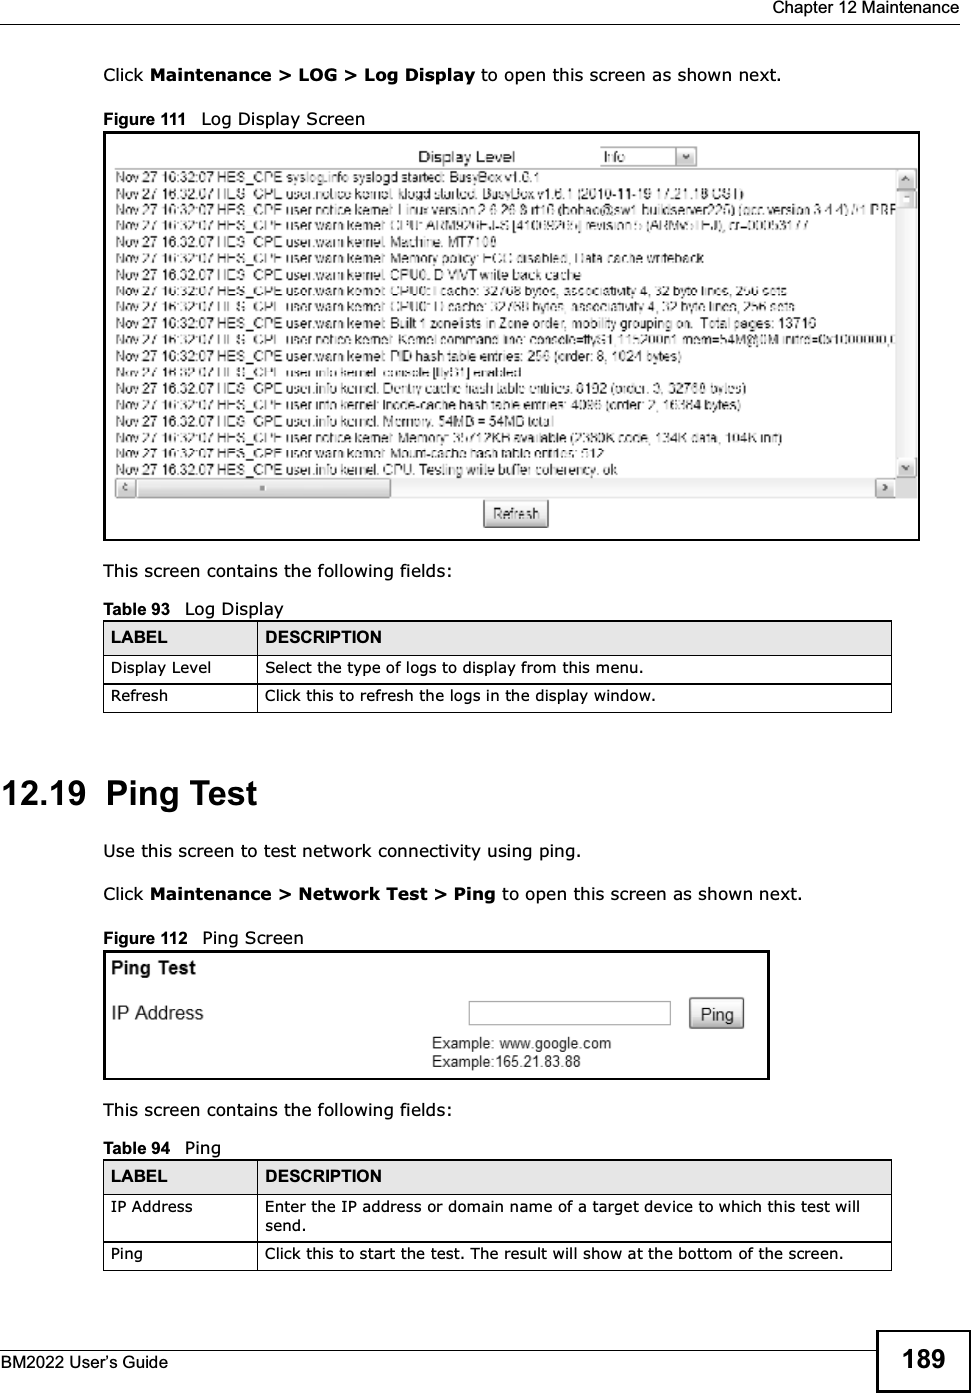  Chapter 12 MaintenanceBM2022 Users Guide 189Click Maintenance &gt; LOG &gt; Log Display to open this screen as shown next.Figure 111   Log Display ScreenThis screen contains the following fields:12.19  Ping TestUse this screen to test network connectivity using ping.Click Maintenance &gt; Network Test &gt; Ping to open this screen as shown next.Figure 112   Ping ScreenThis screen contains the following fields:Table 93   Log DisplayLABEL DESCRIPTIONDisplay Level Select the type of logs to display from this menu.Refresh Click this to refresh the logs in the display window.Table 94   PingLABEL DESCRIPTIONIP Address Enter the IP address or domain name of a target device to which this test will send.Ping Click this to start the test. The result will show at the bottom of the screen.